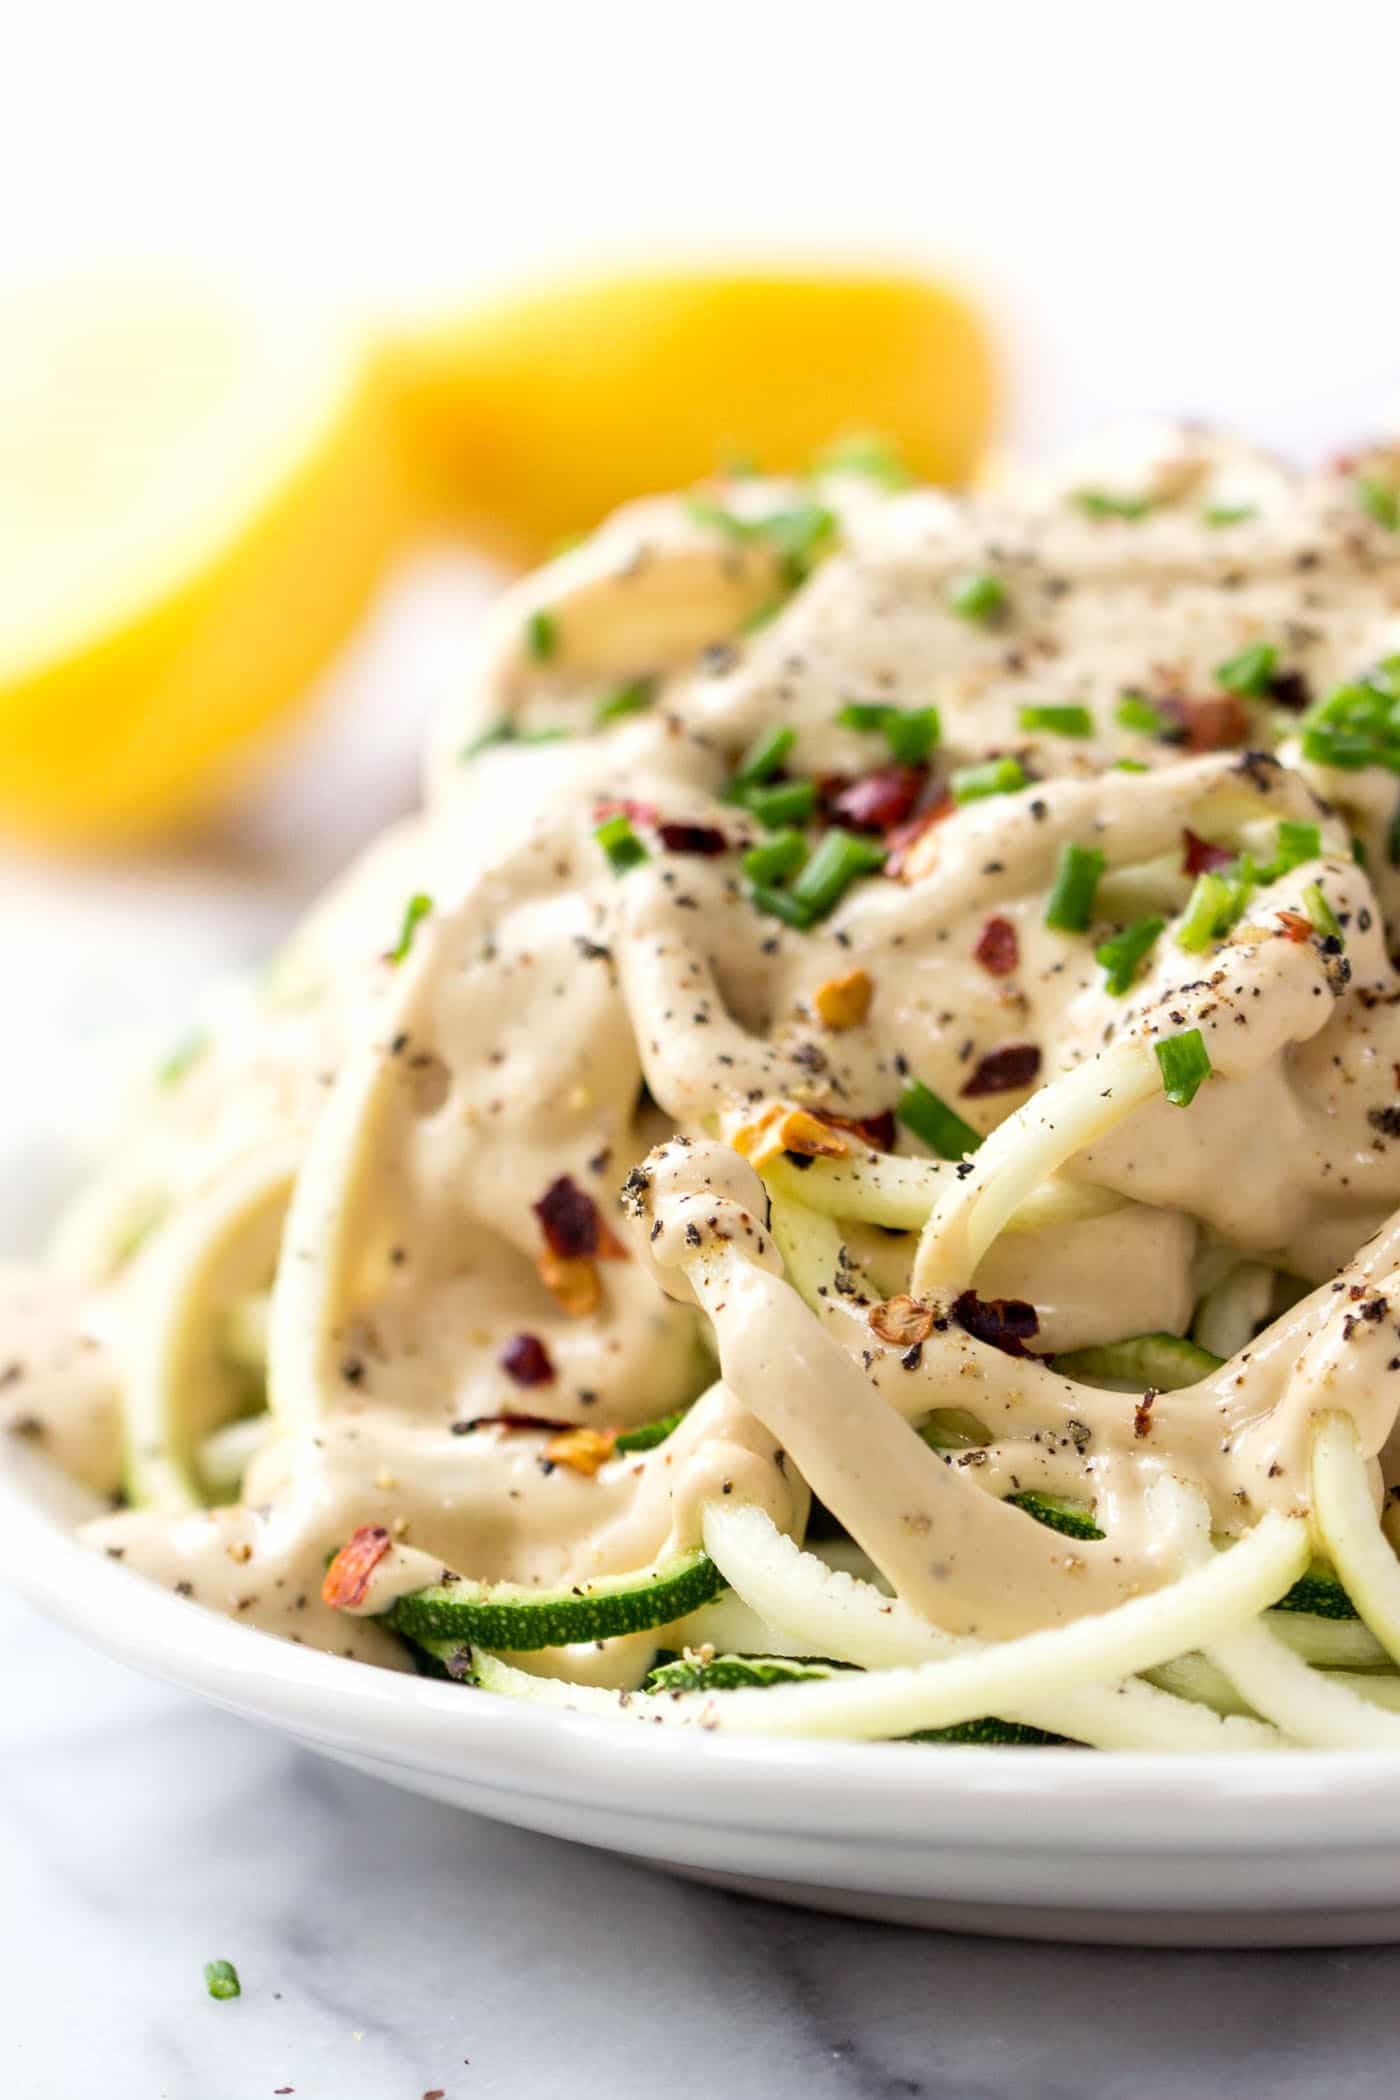 VEGAN LEMON CREAM SAUCE on top of spiralized zucchini noodles! A light and healthy dish that is burst with plant-based protein!